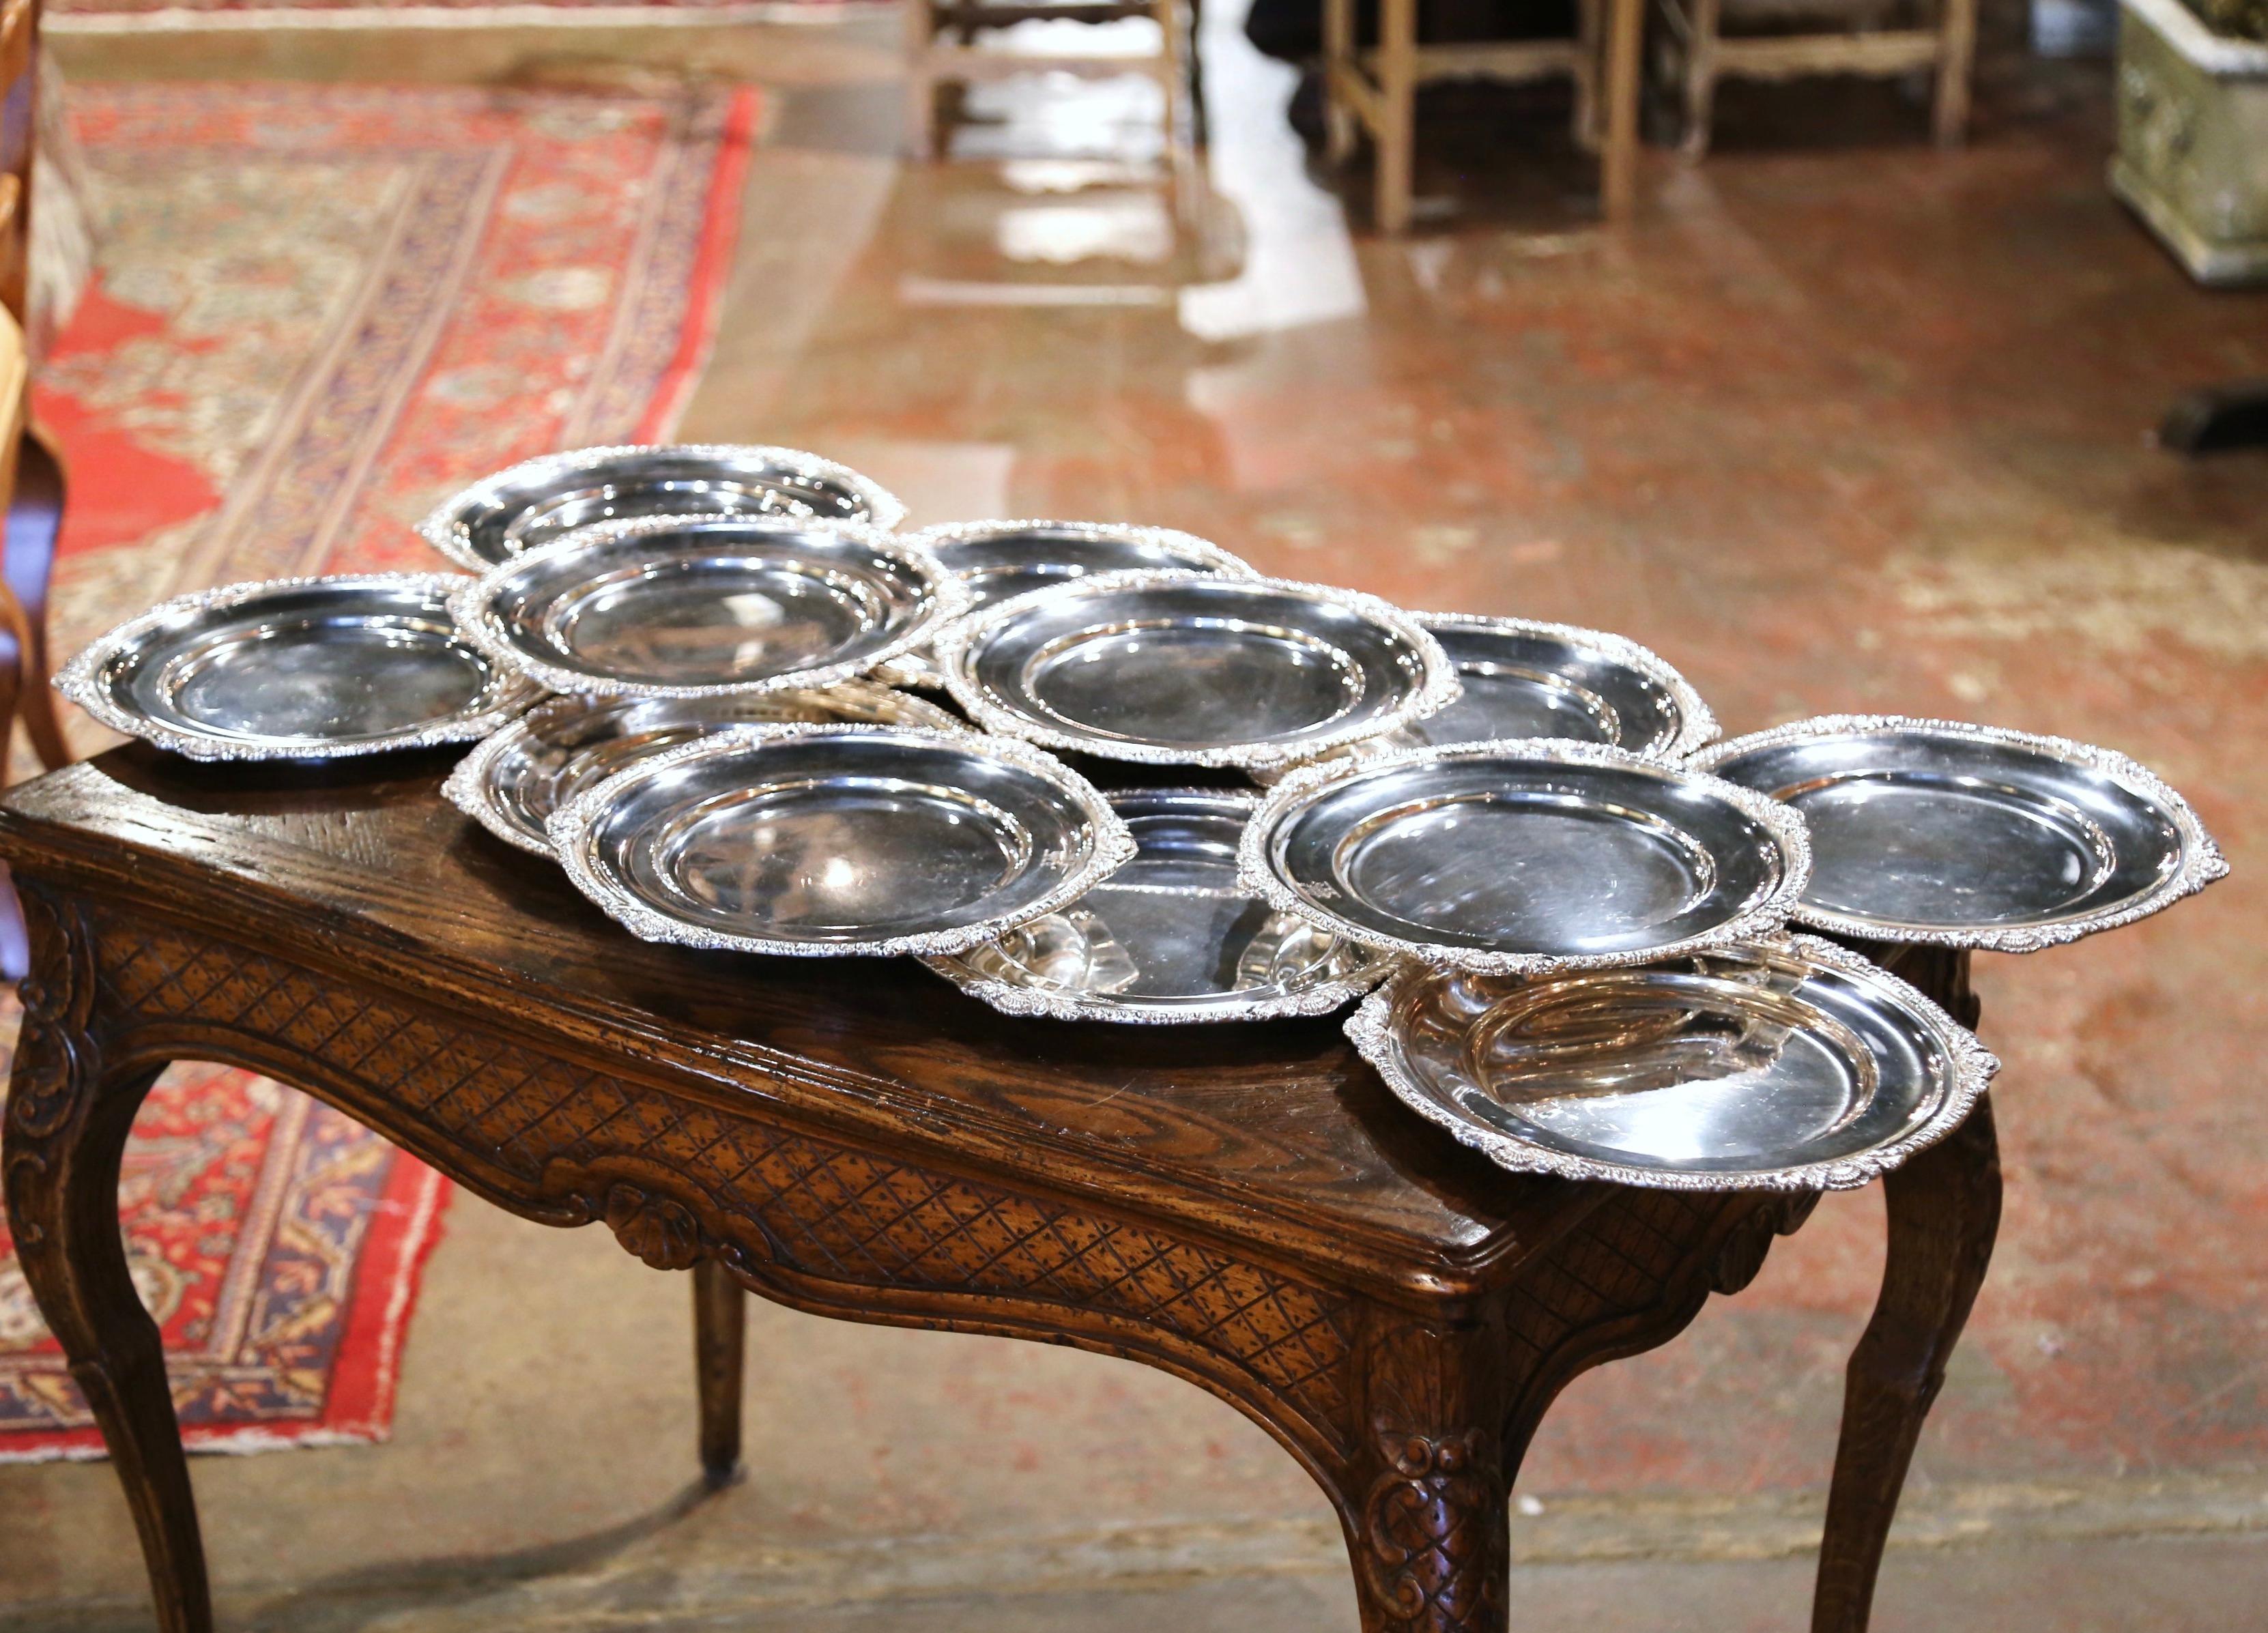 Dress your dining table with elegance using this midcentury set under plate. Crafted in France circa 1950, each silverplated charger features ornate scroll and shell decor throughout the rim of the plate. Displayed on each service plate is a group